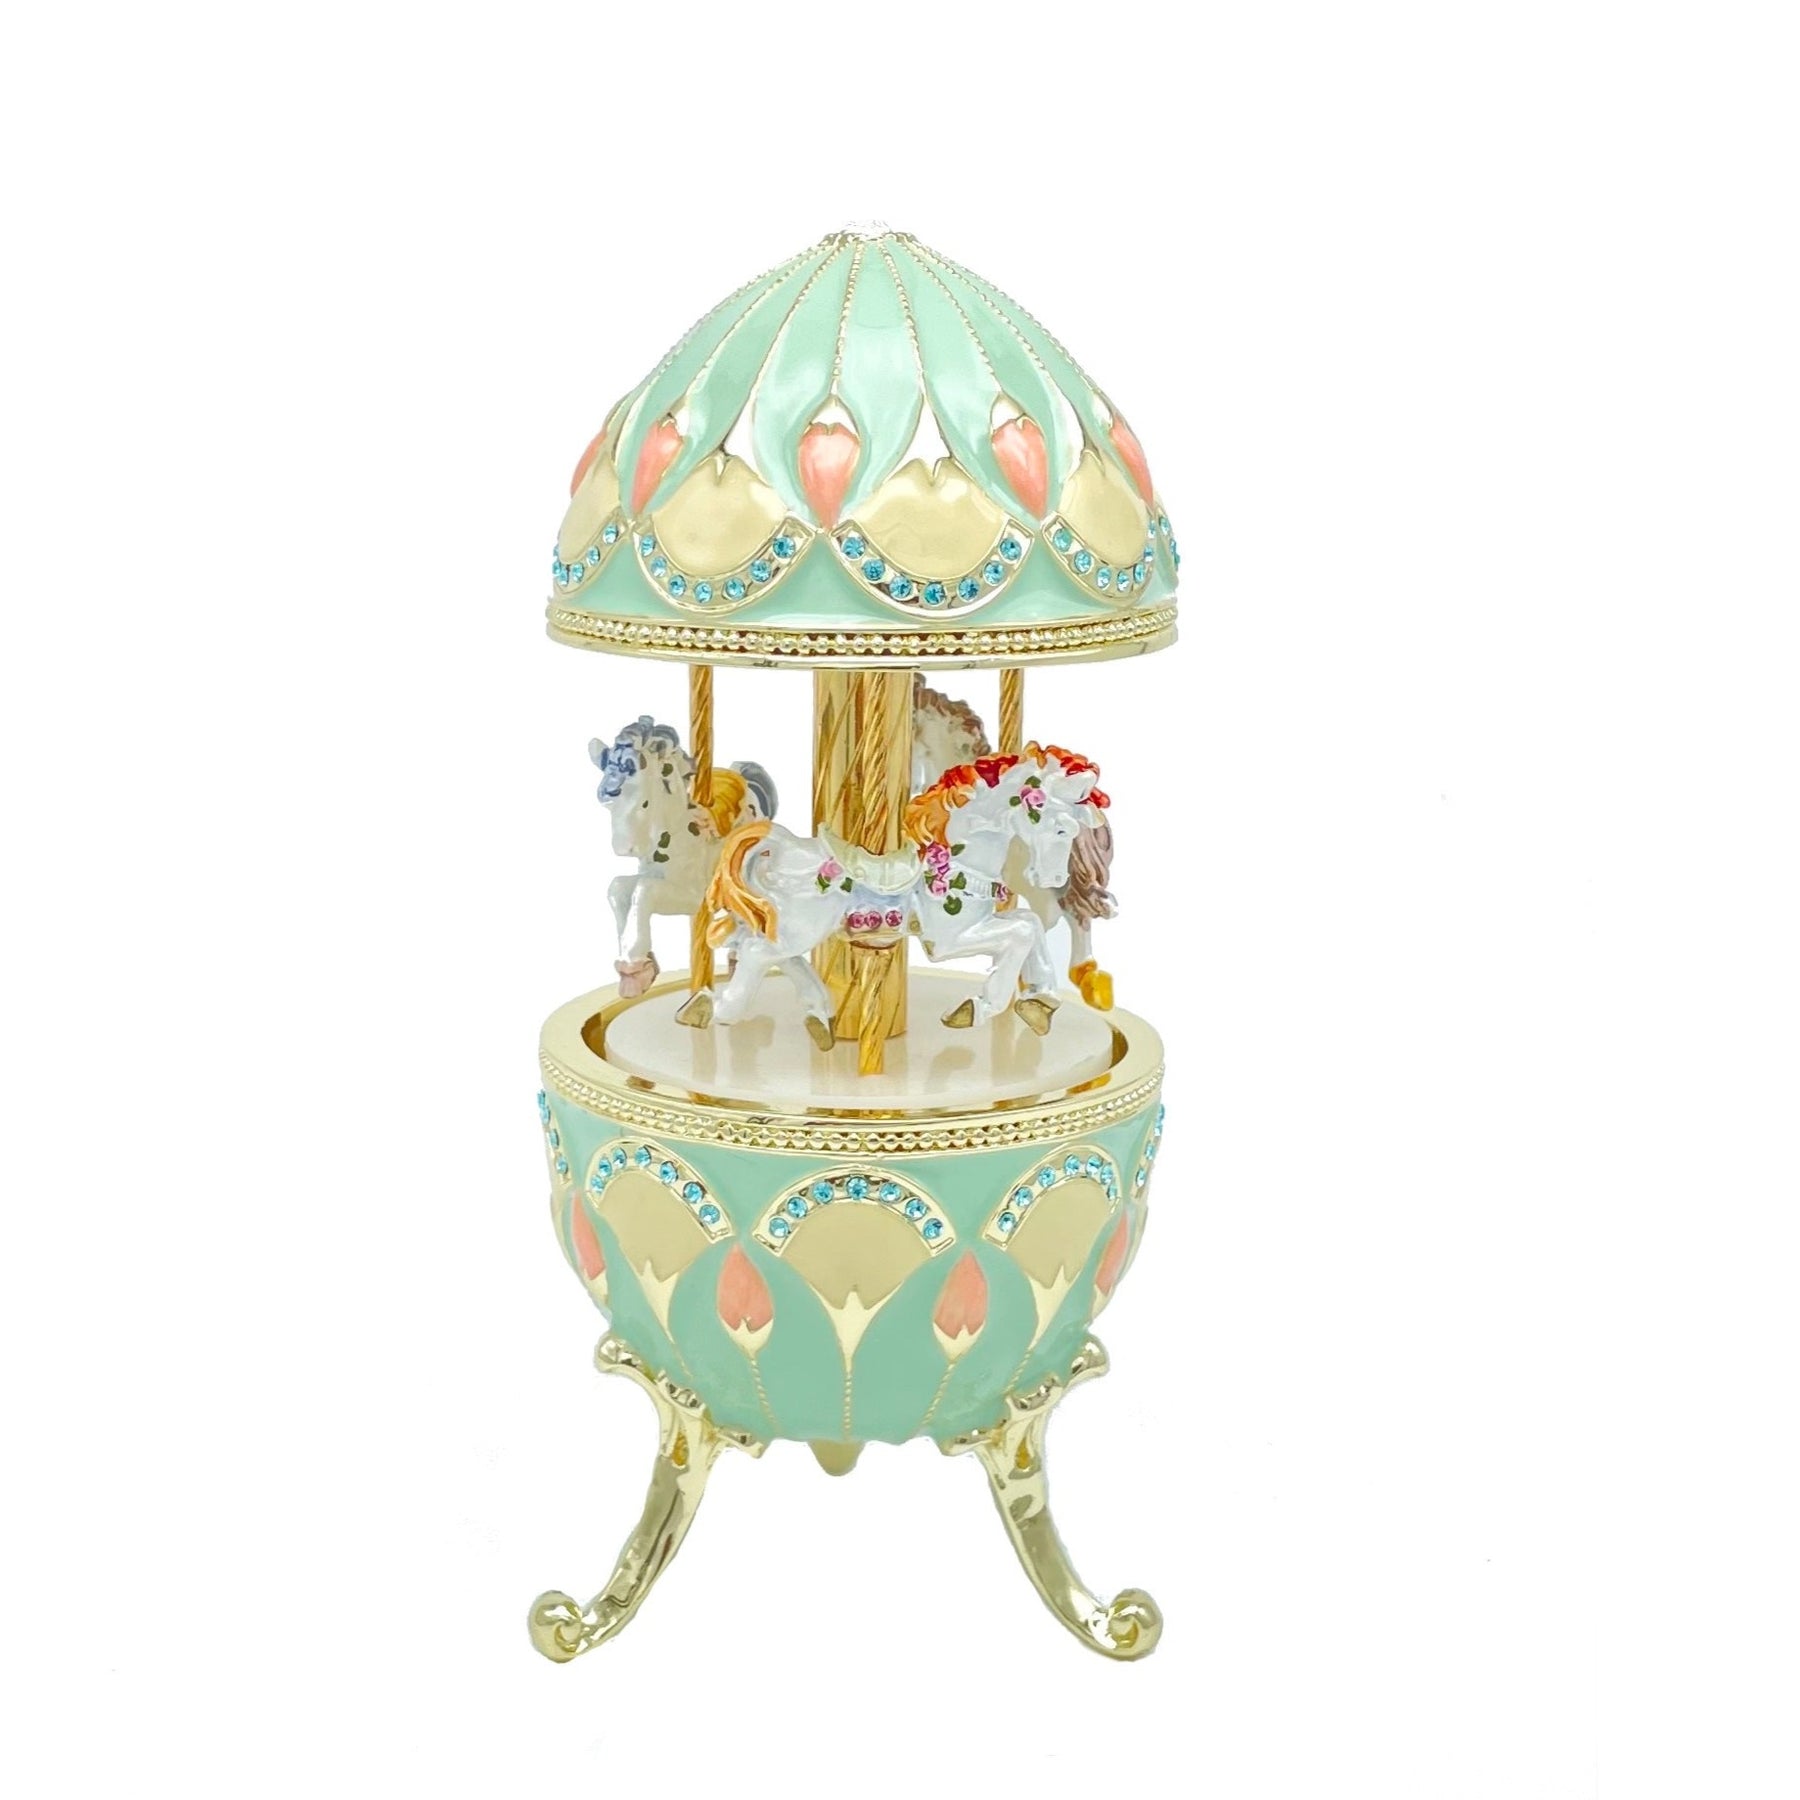 Green Musical Carousel with Royal Horses